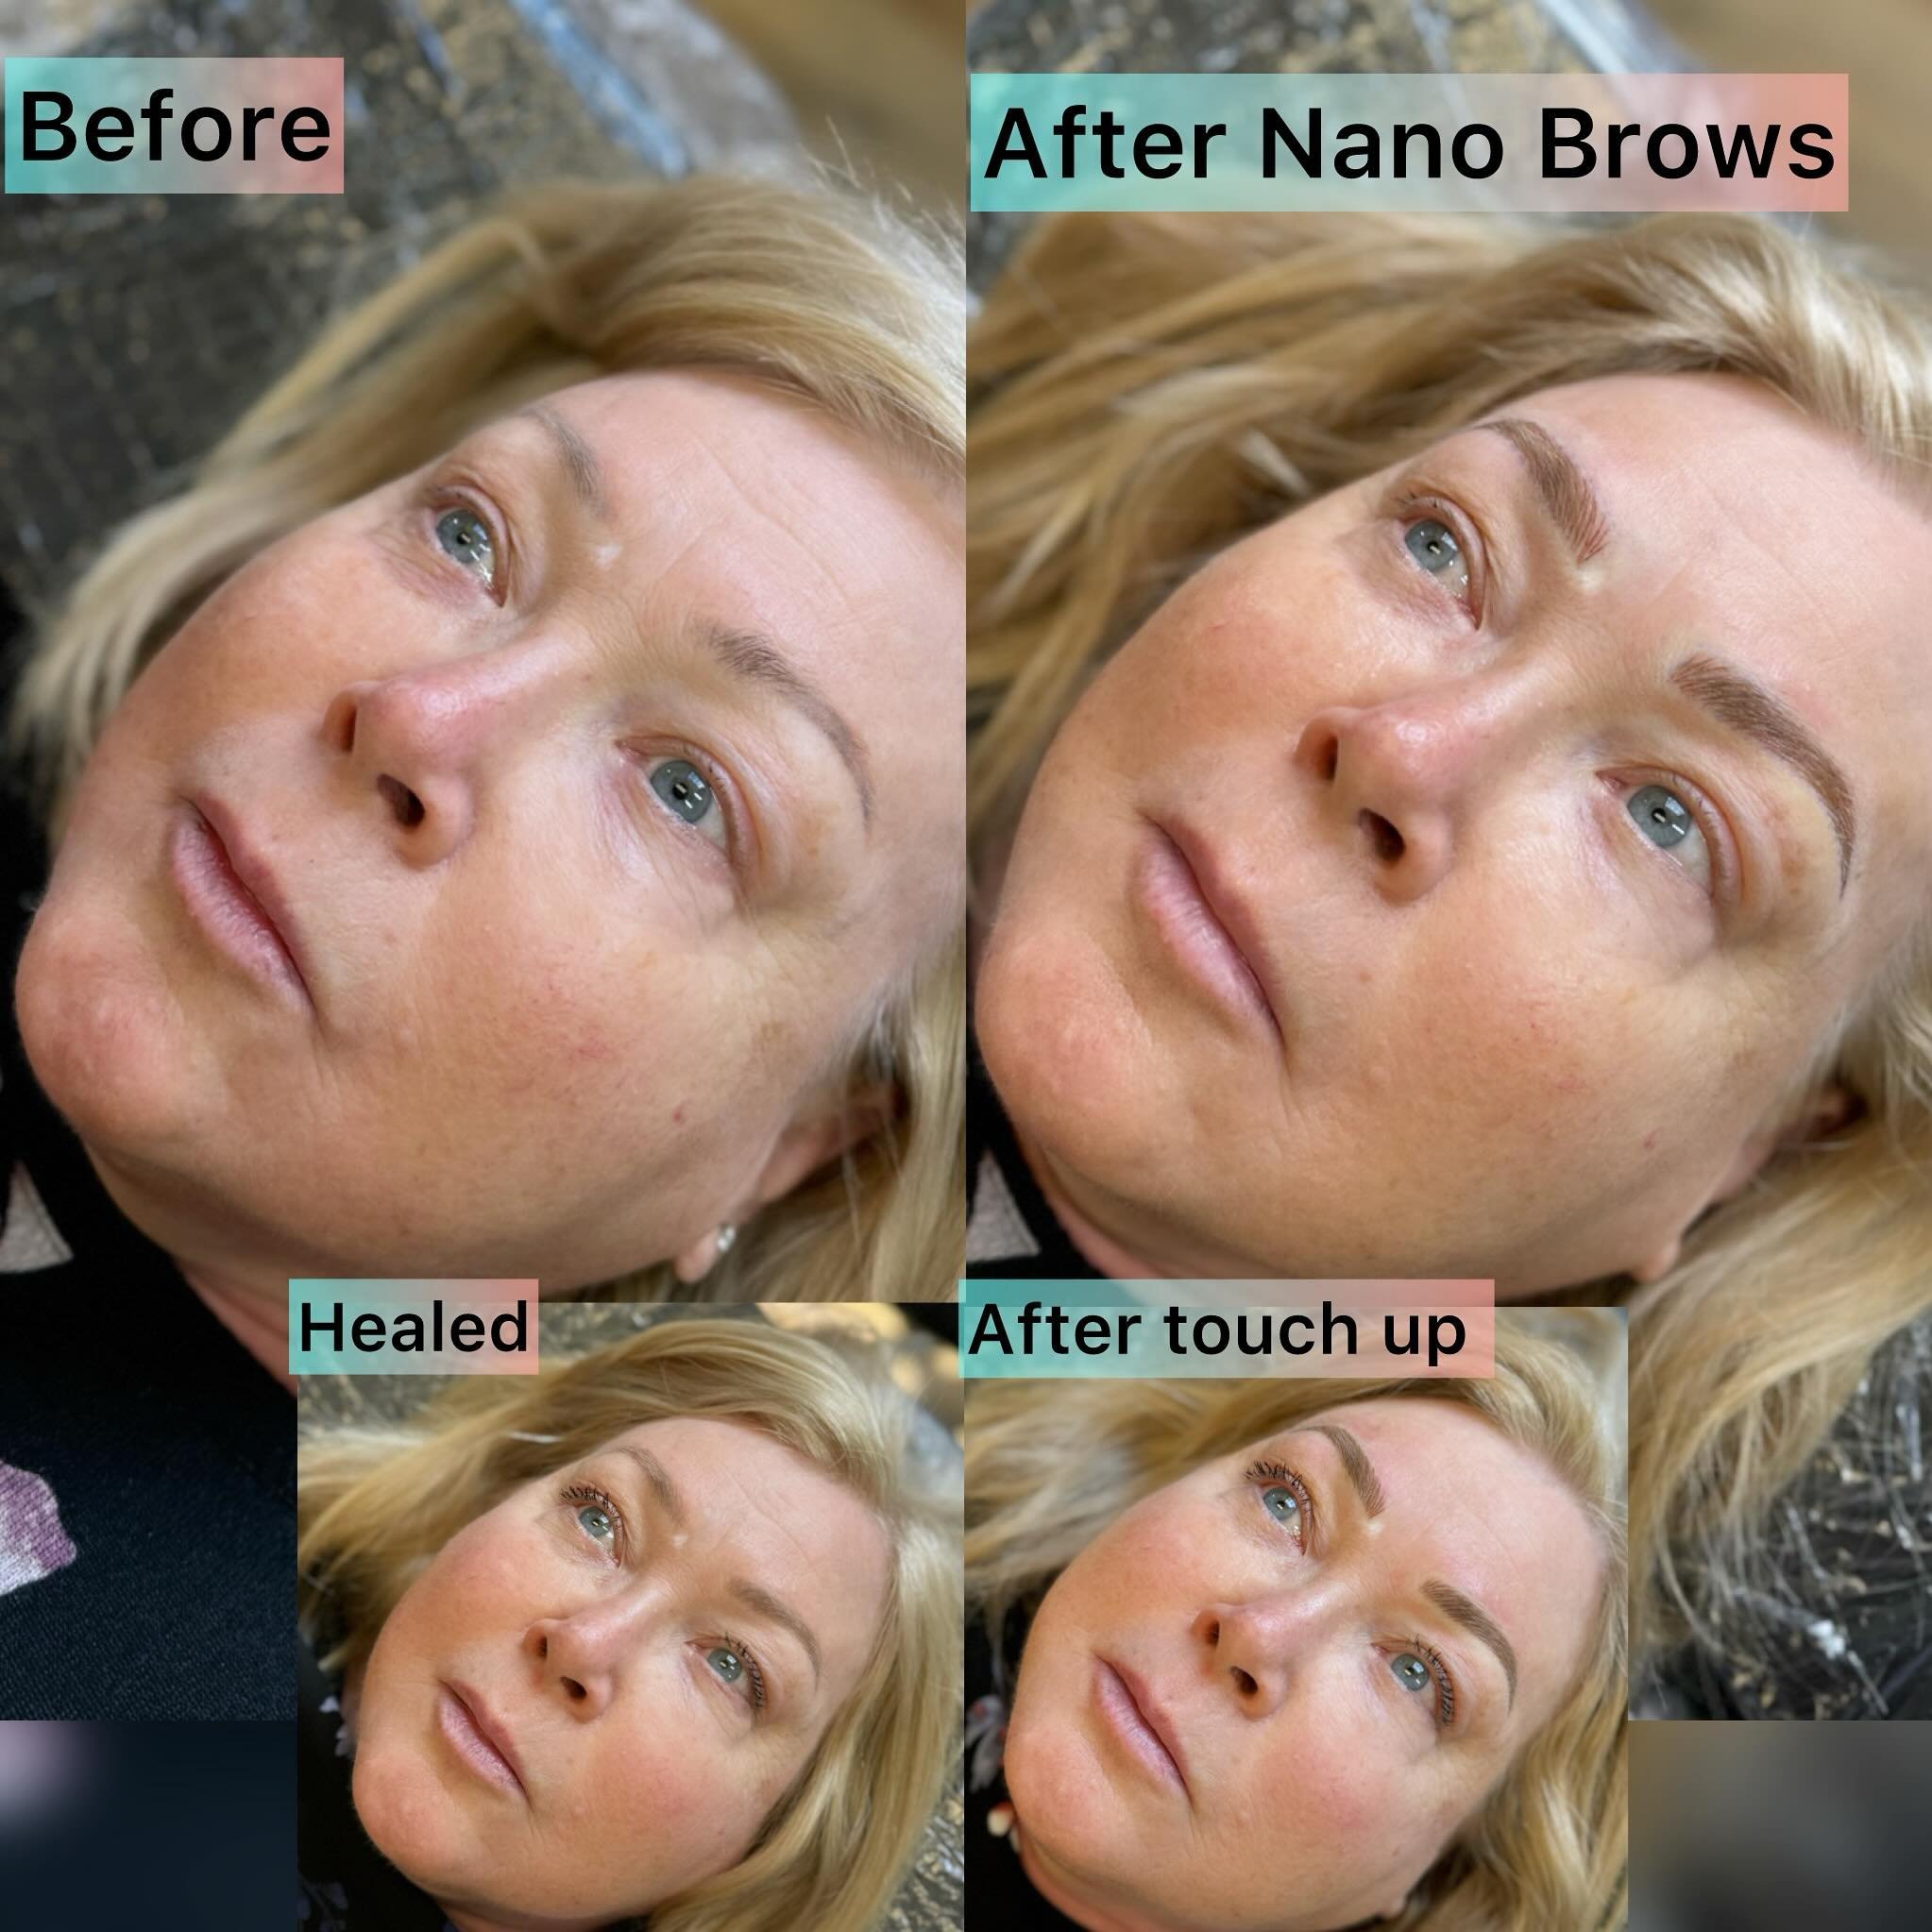 Nano Brow process ✨

Touch ups are important to ensure that each stroke is dark enough. On a first session we need to see how the ink goes into the skin without overworking it and then see how it heals, ESPECIALLY when going over old ink. Everyone&rs